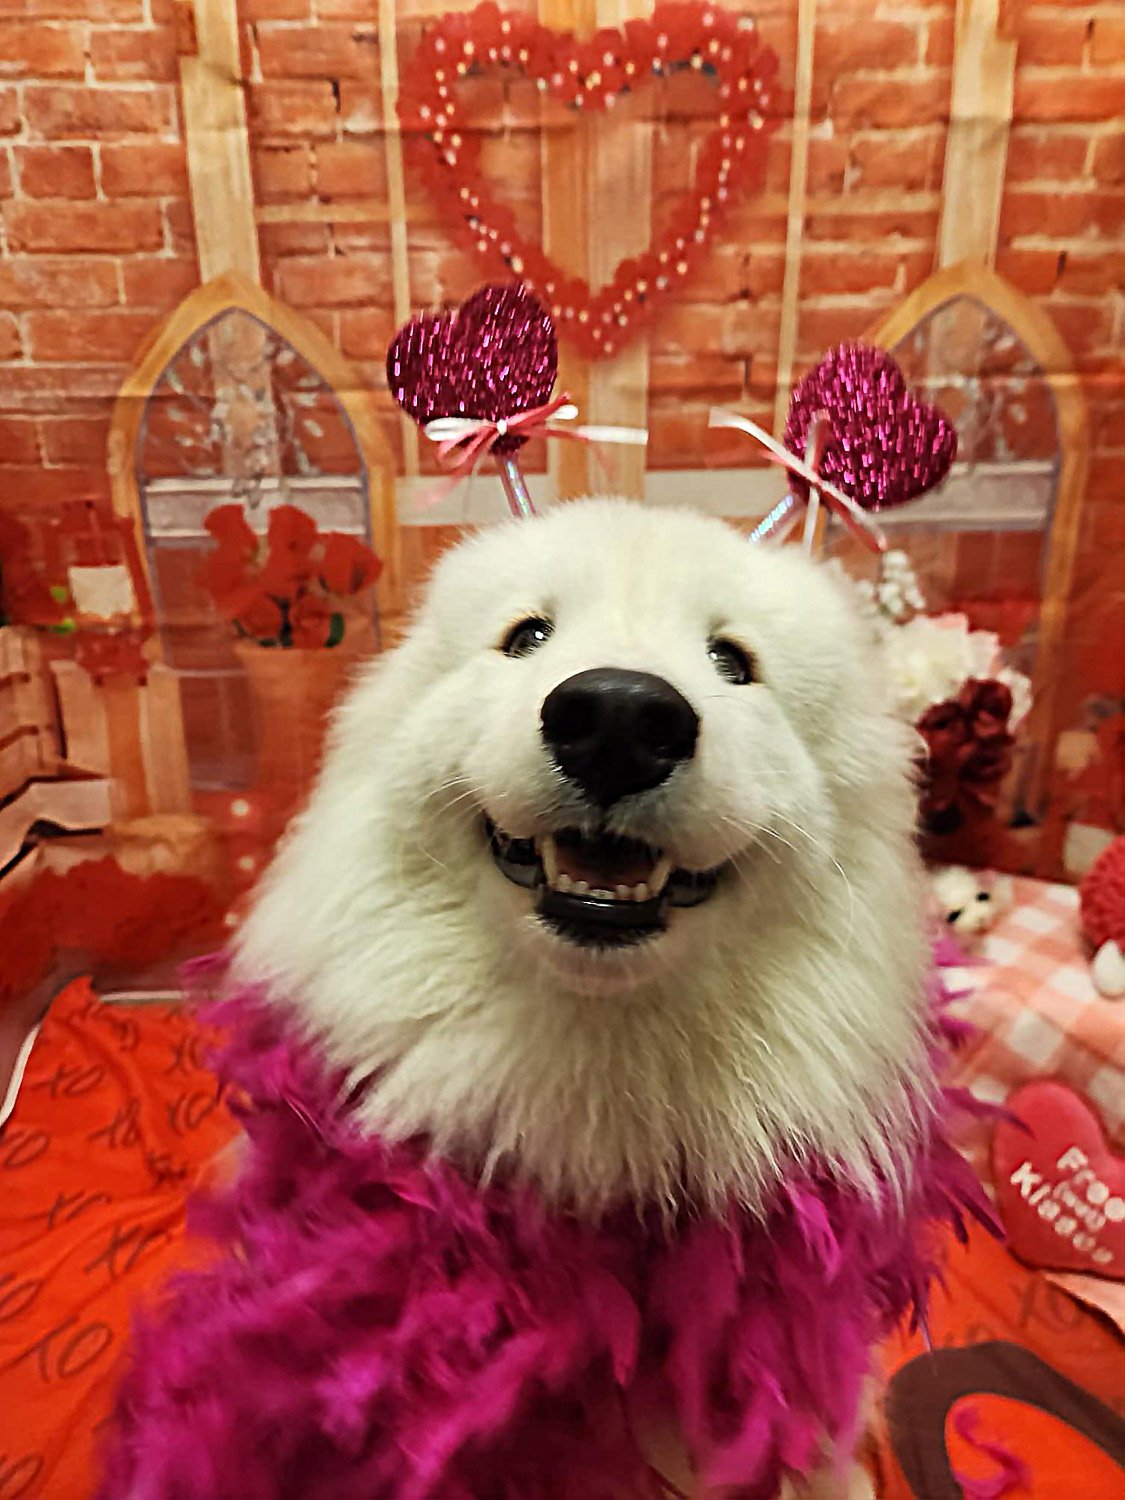 A large fluffy white dog wearing a red feathery top looking up at camera